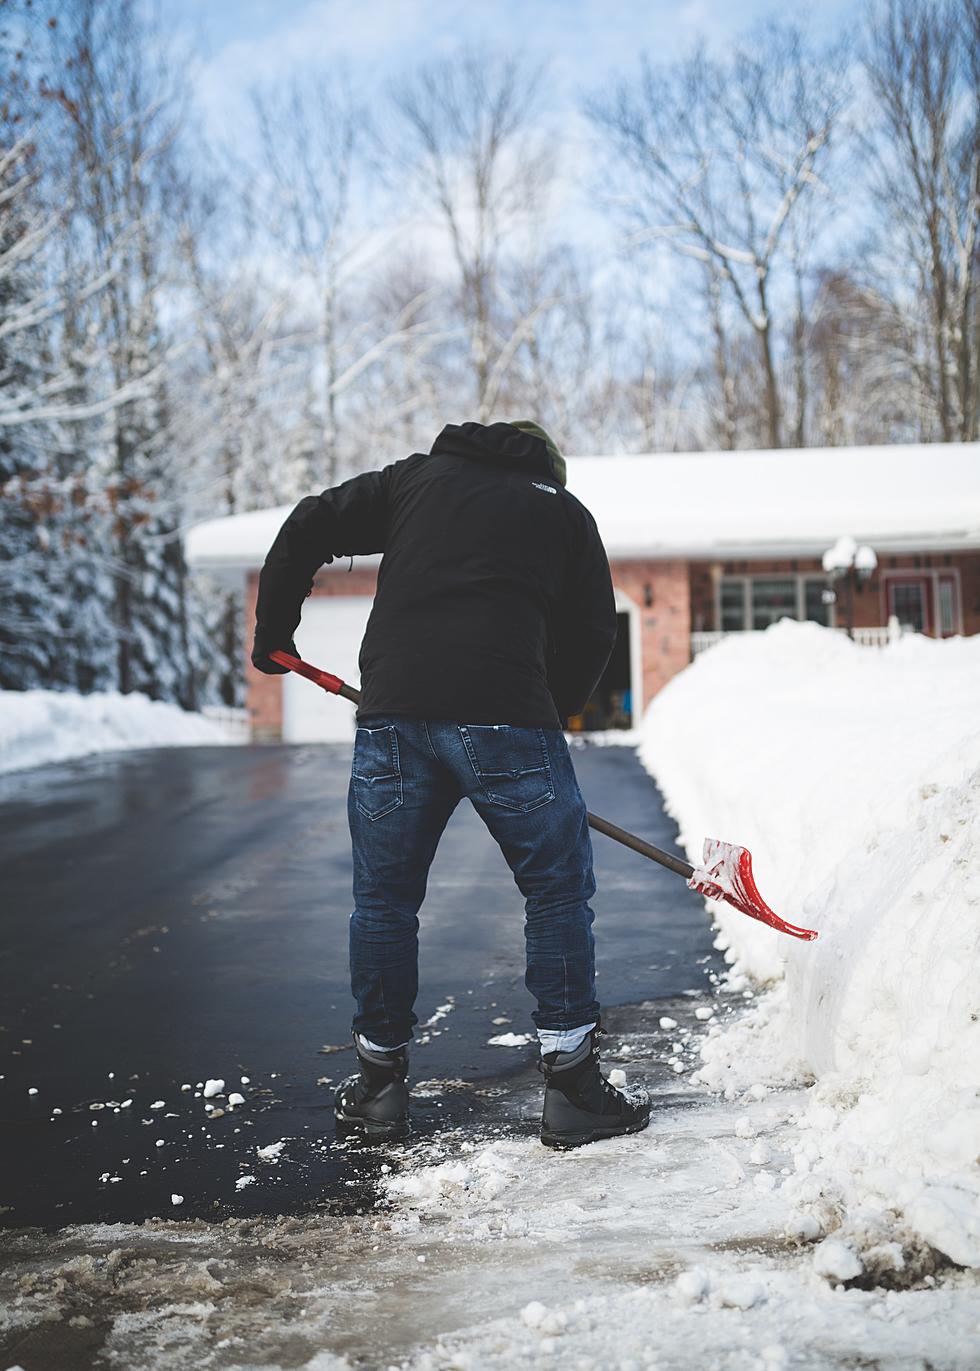 Are You Legally Required To Shovel Your Sidewalk In Maine?